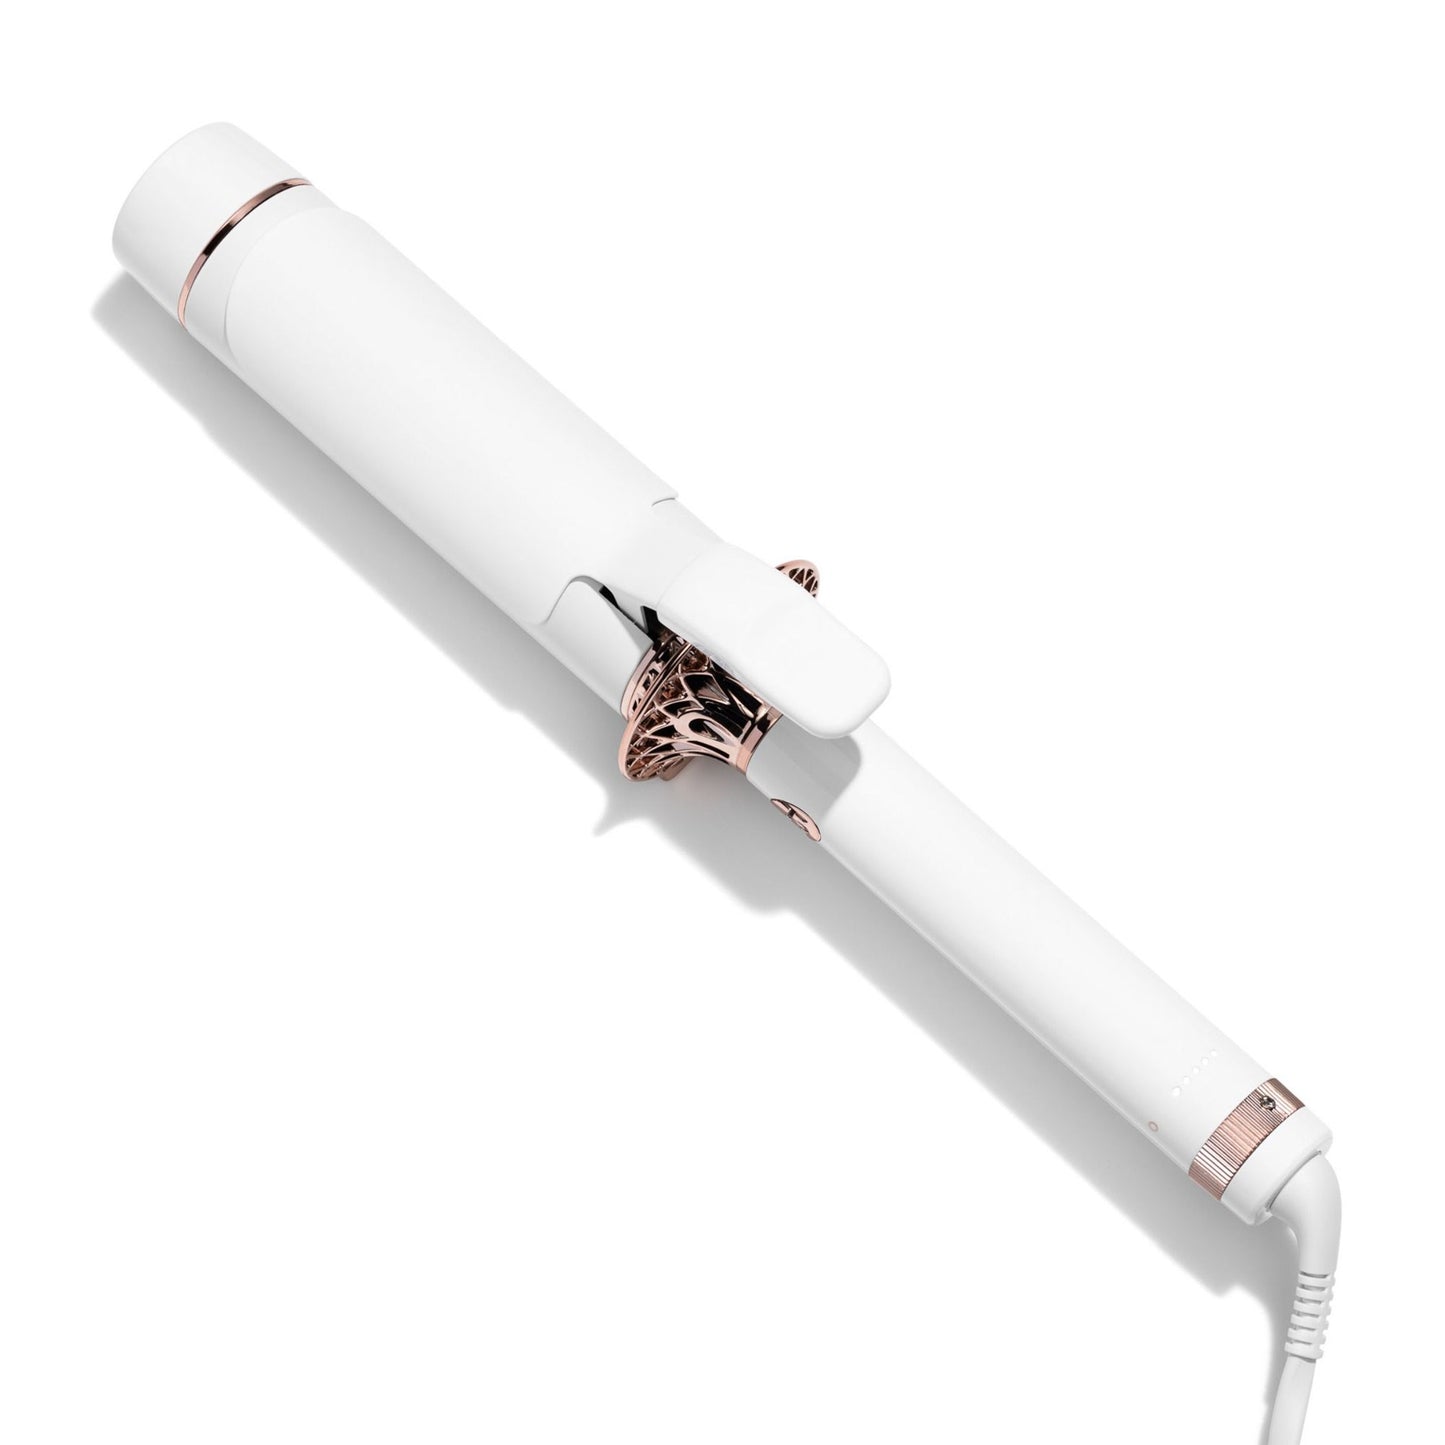 BodyWaver 1.75” Professional Ceramic Styling Iron for Waves and Volume (White & Rose Gold)